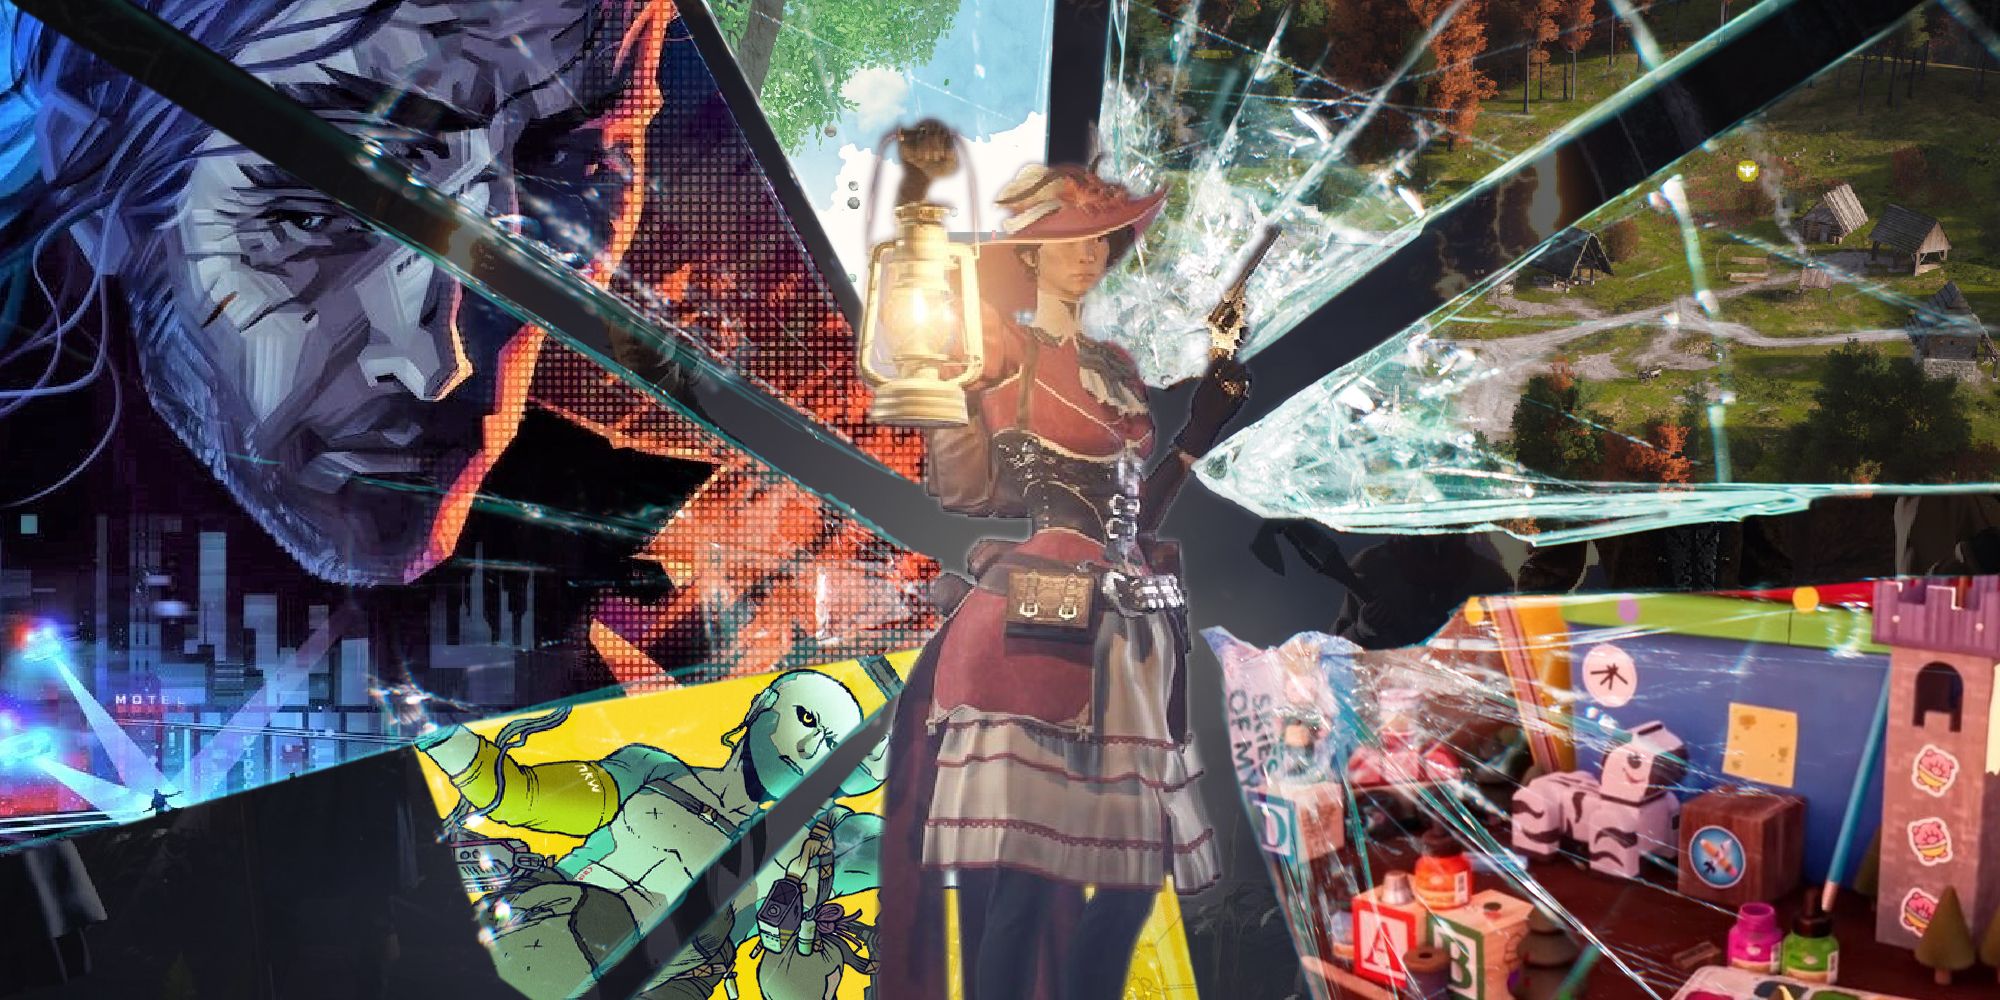 Indie games appearing in shattered glass while a character from Nightingale stands in the centre holding up a lantern and a revolver